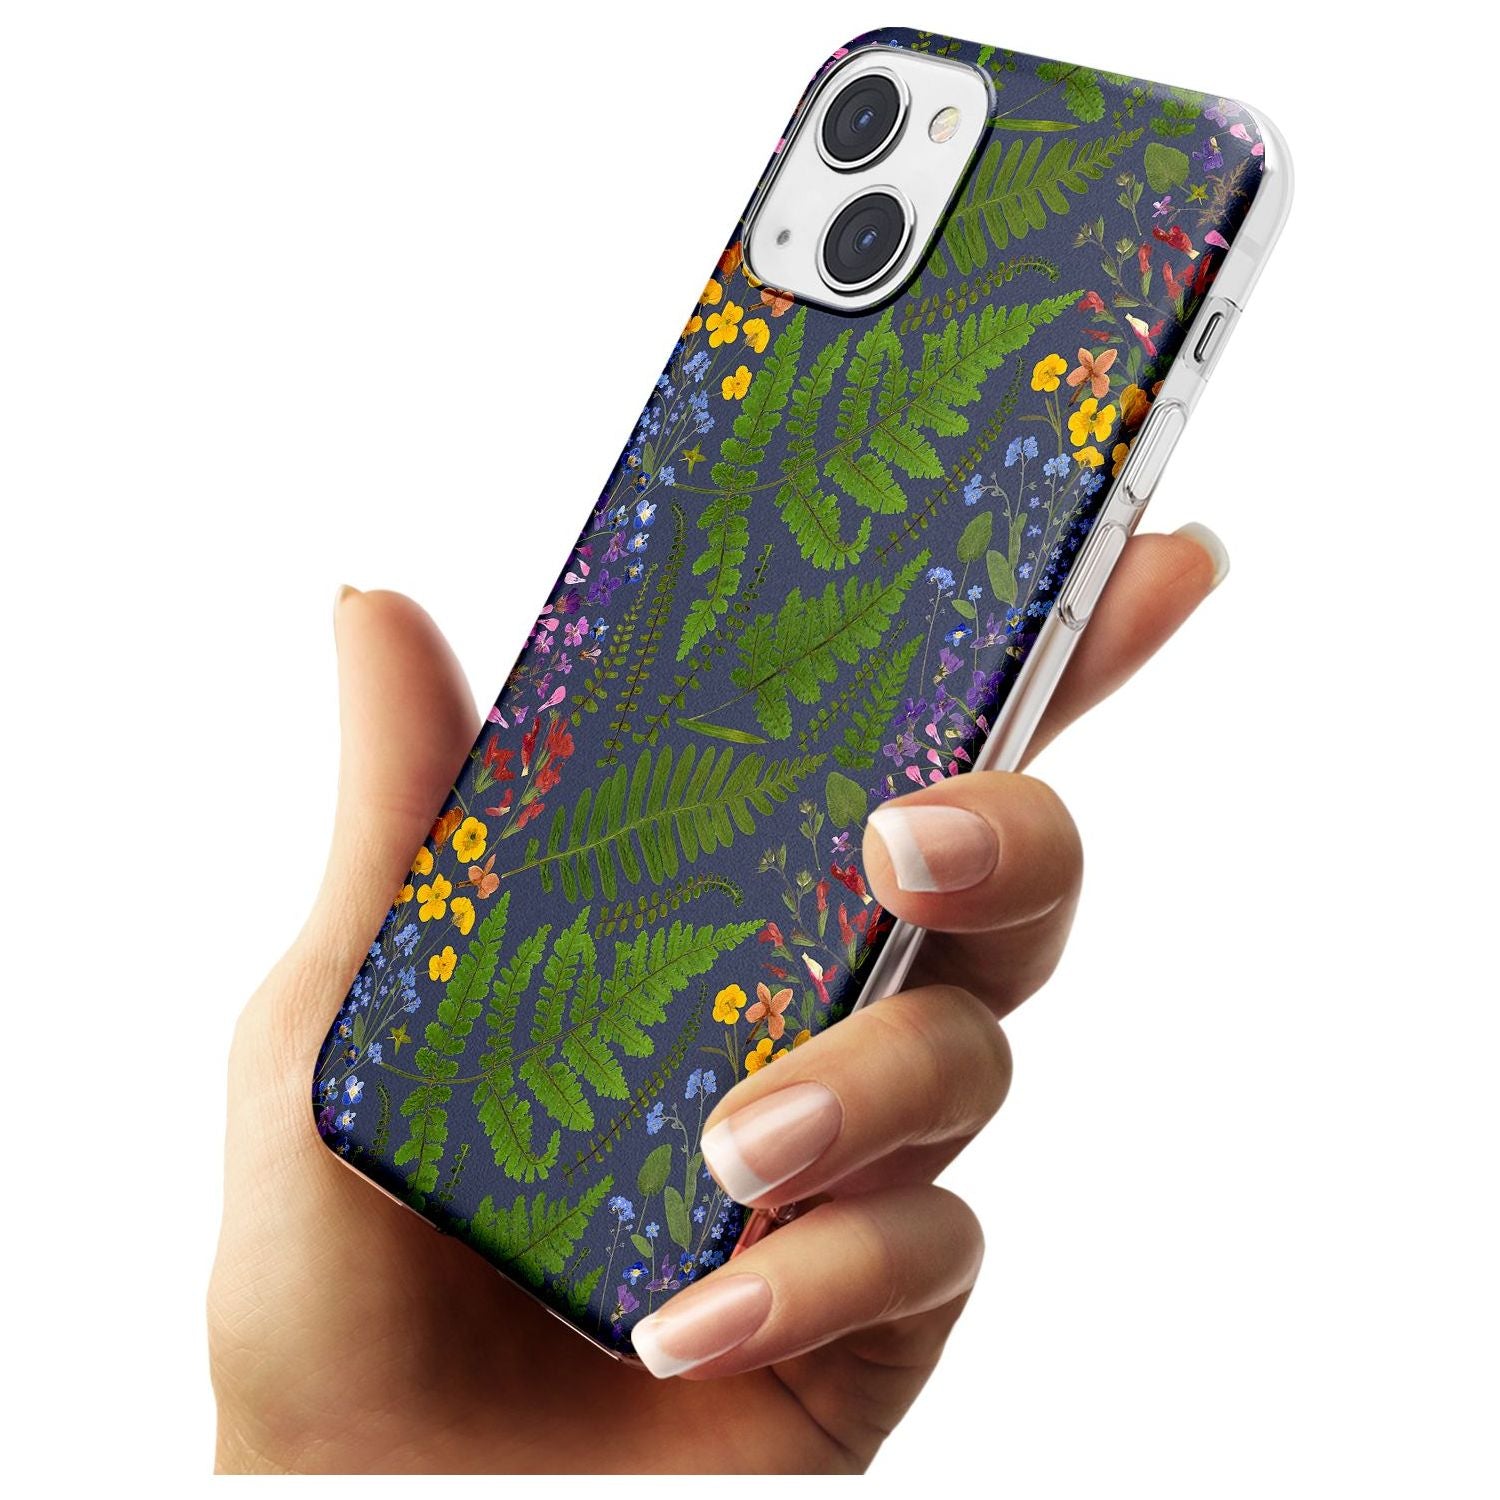 Busy Floral and Fern Design - Navy